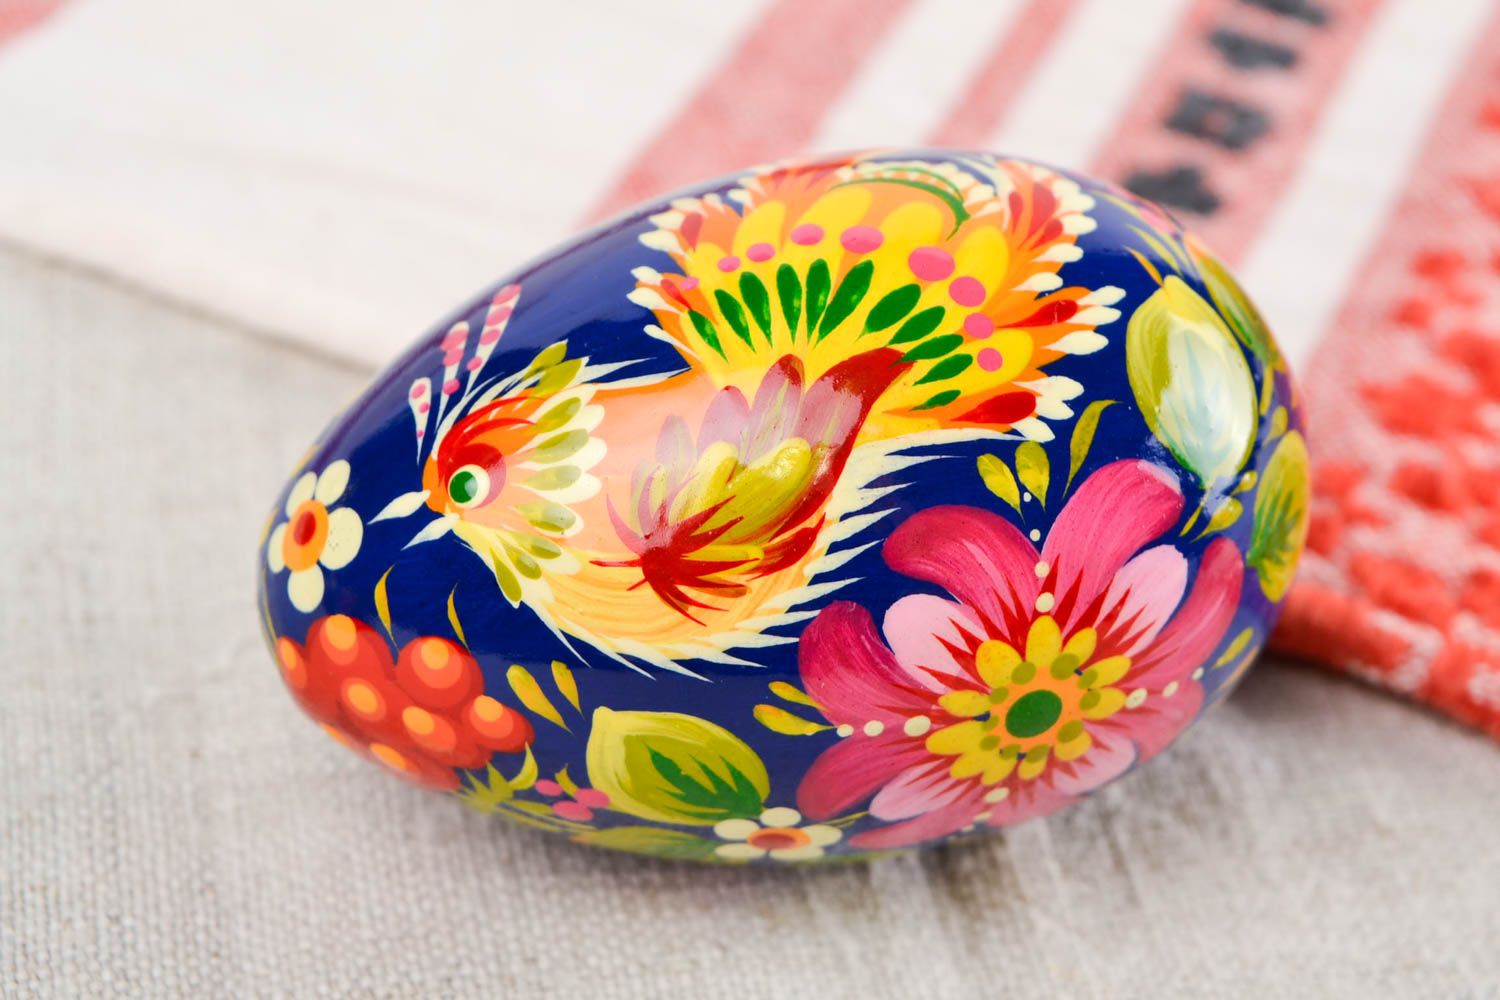 Handmade wooden Easter egg room ideas painted Easter eggs decorative use only photo 1